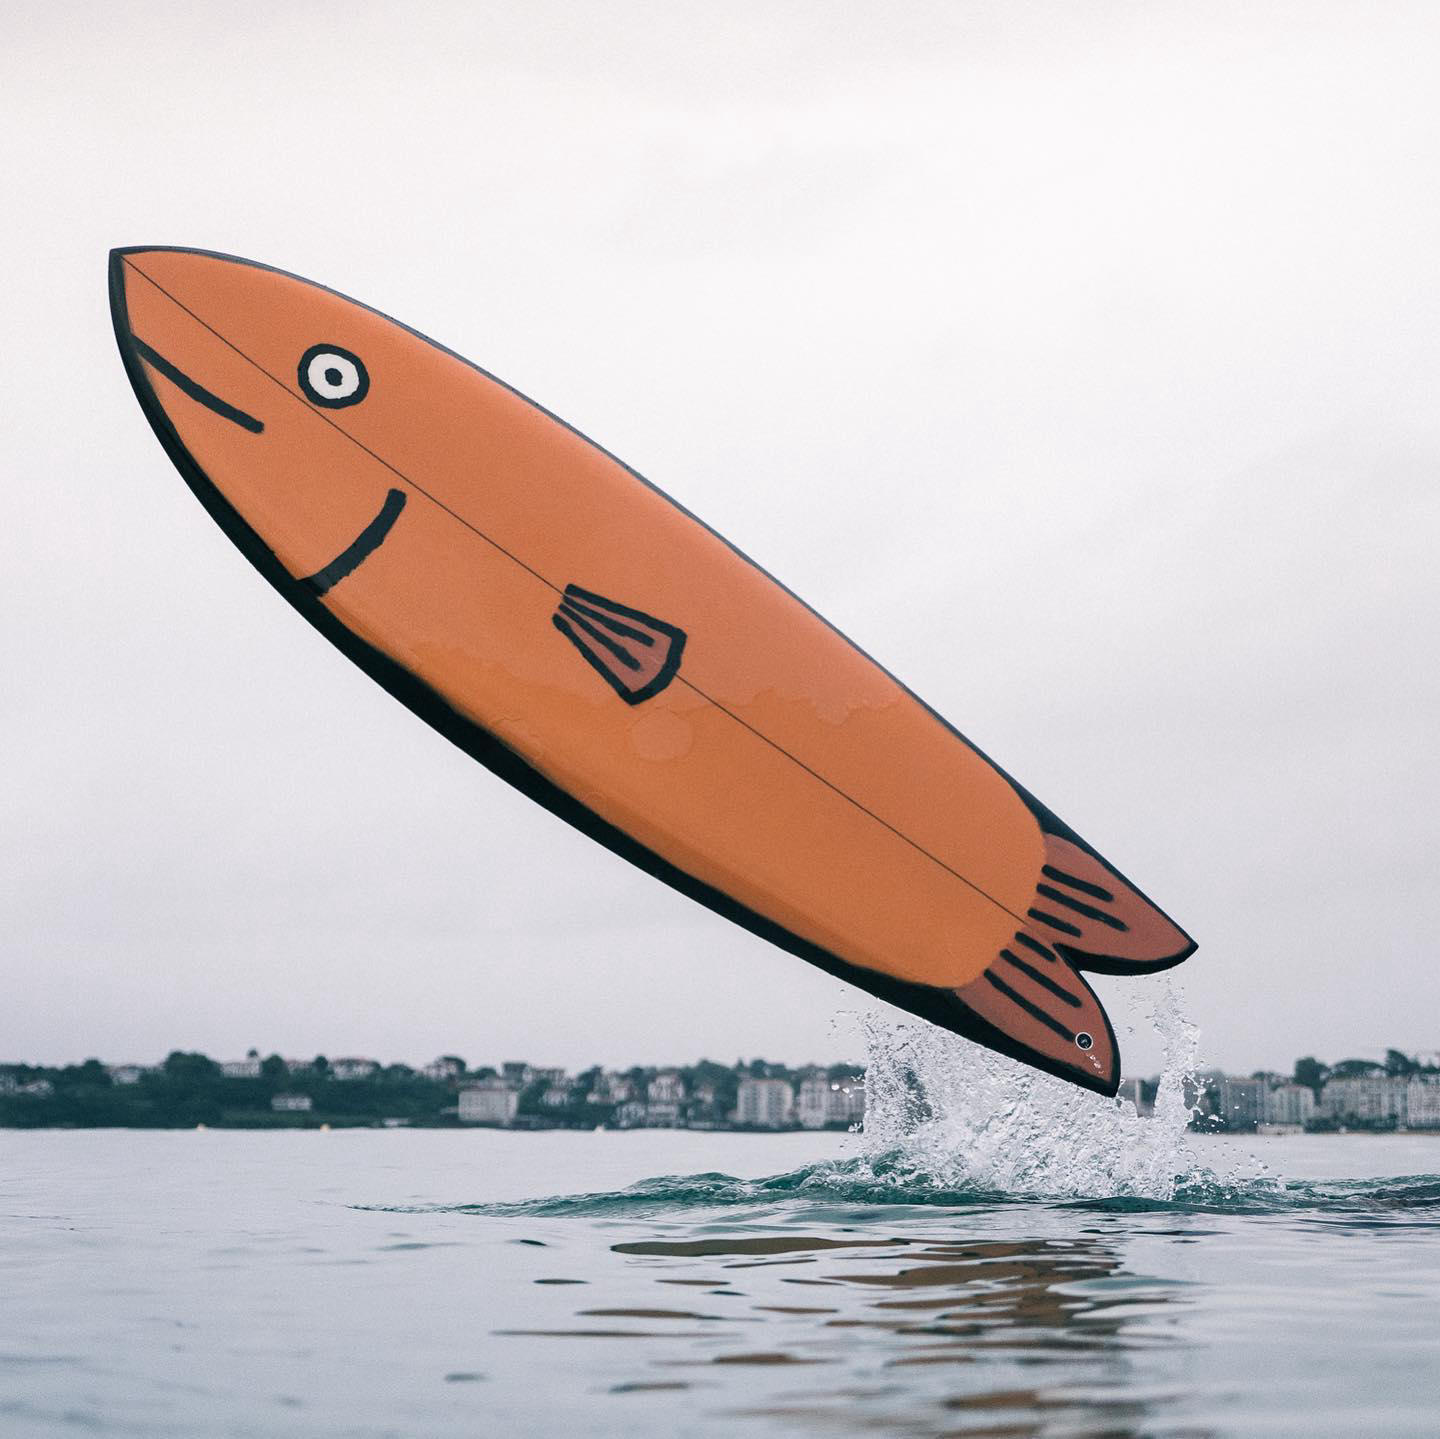 image  1 Jean Jullien - Super happy to present the four surfboards I’ve done with #fernandsurfboards